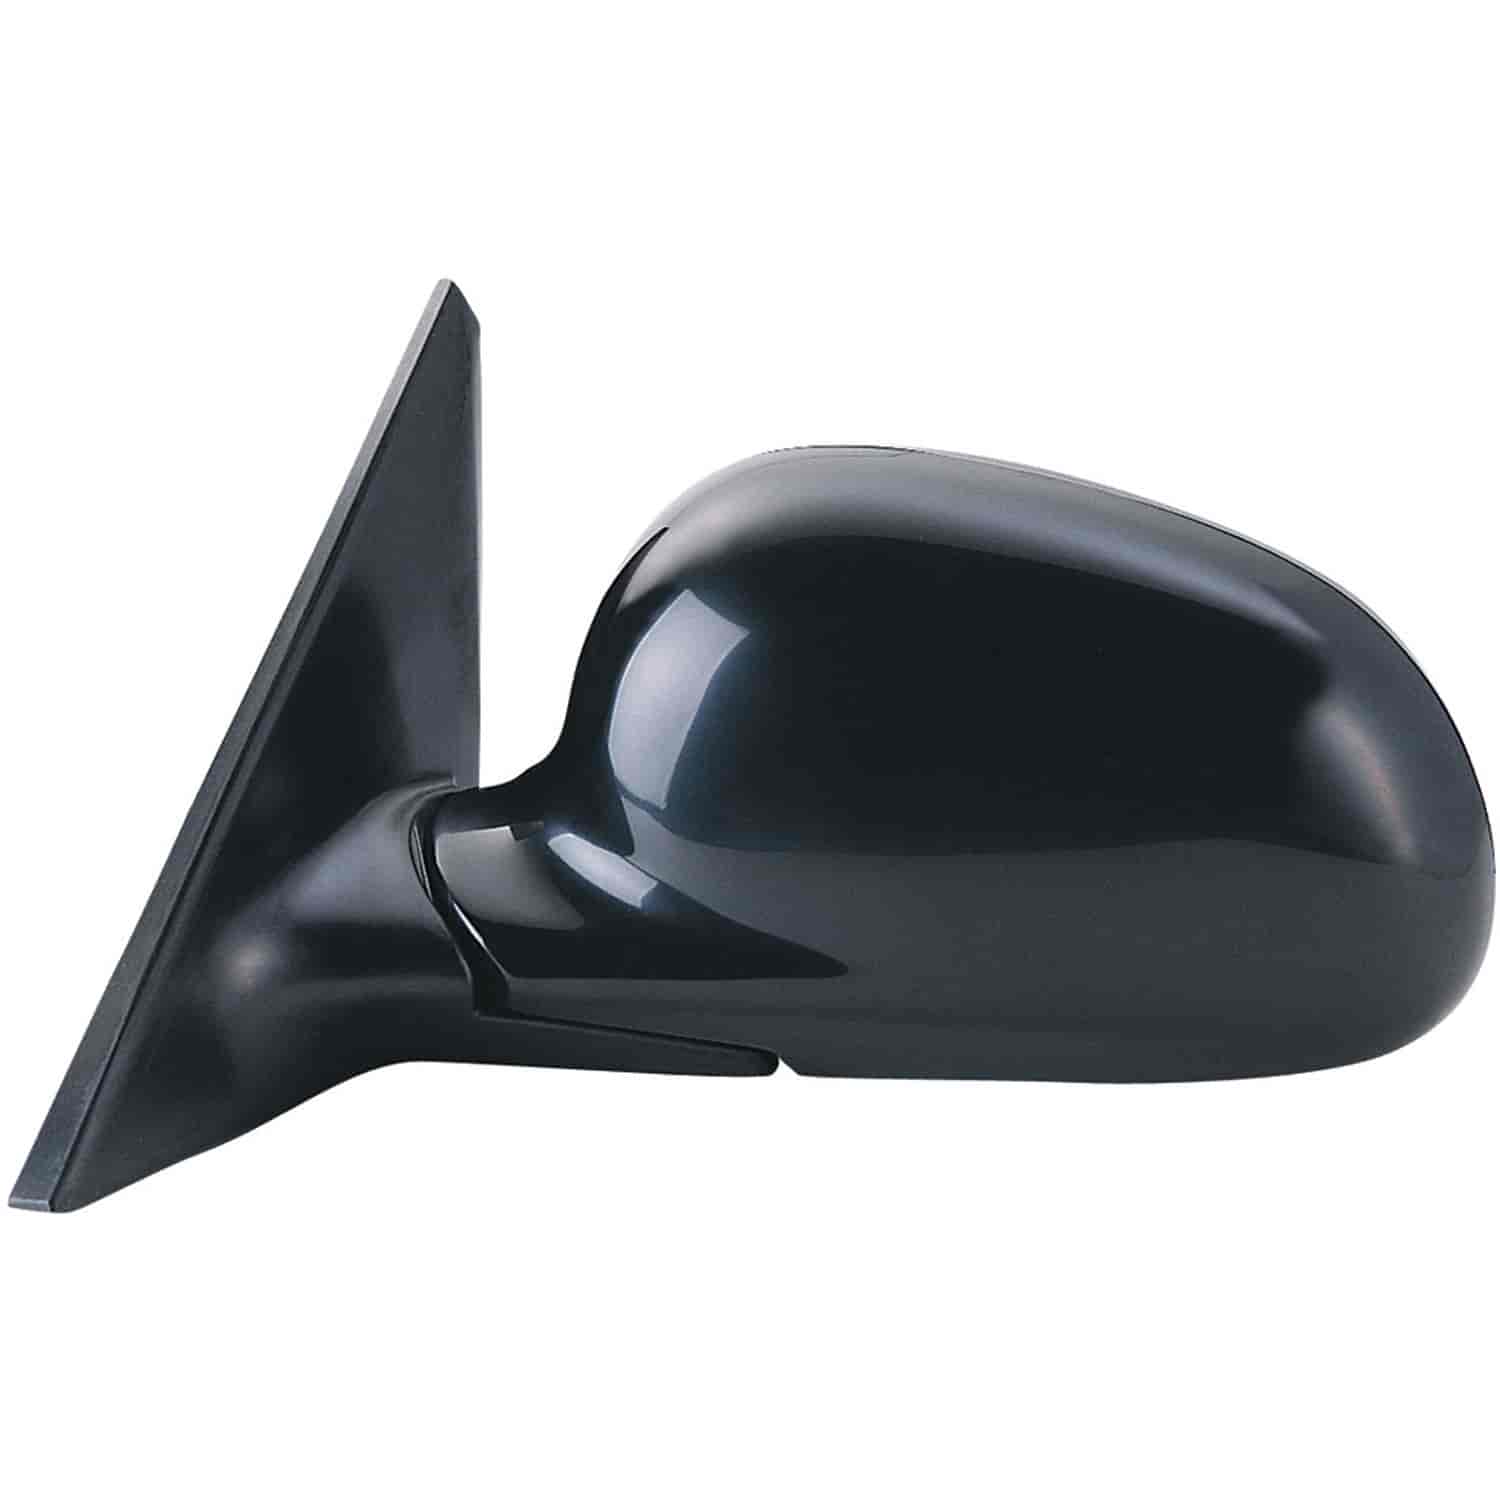 OEM Style Replacement mirror for 92-95 Honda Civic 4 door Sedan driver side mirror tested to fit and